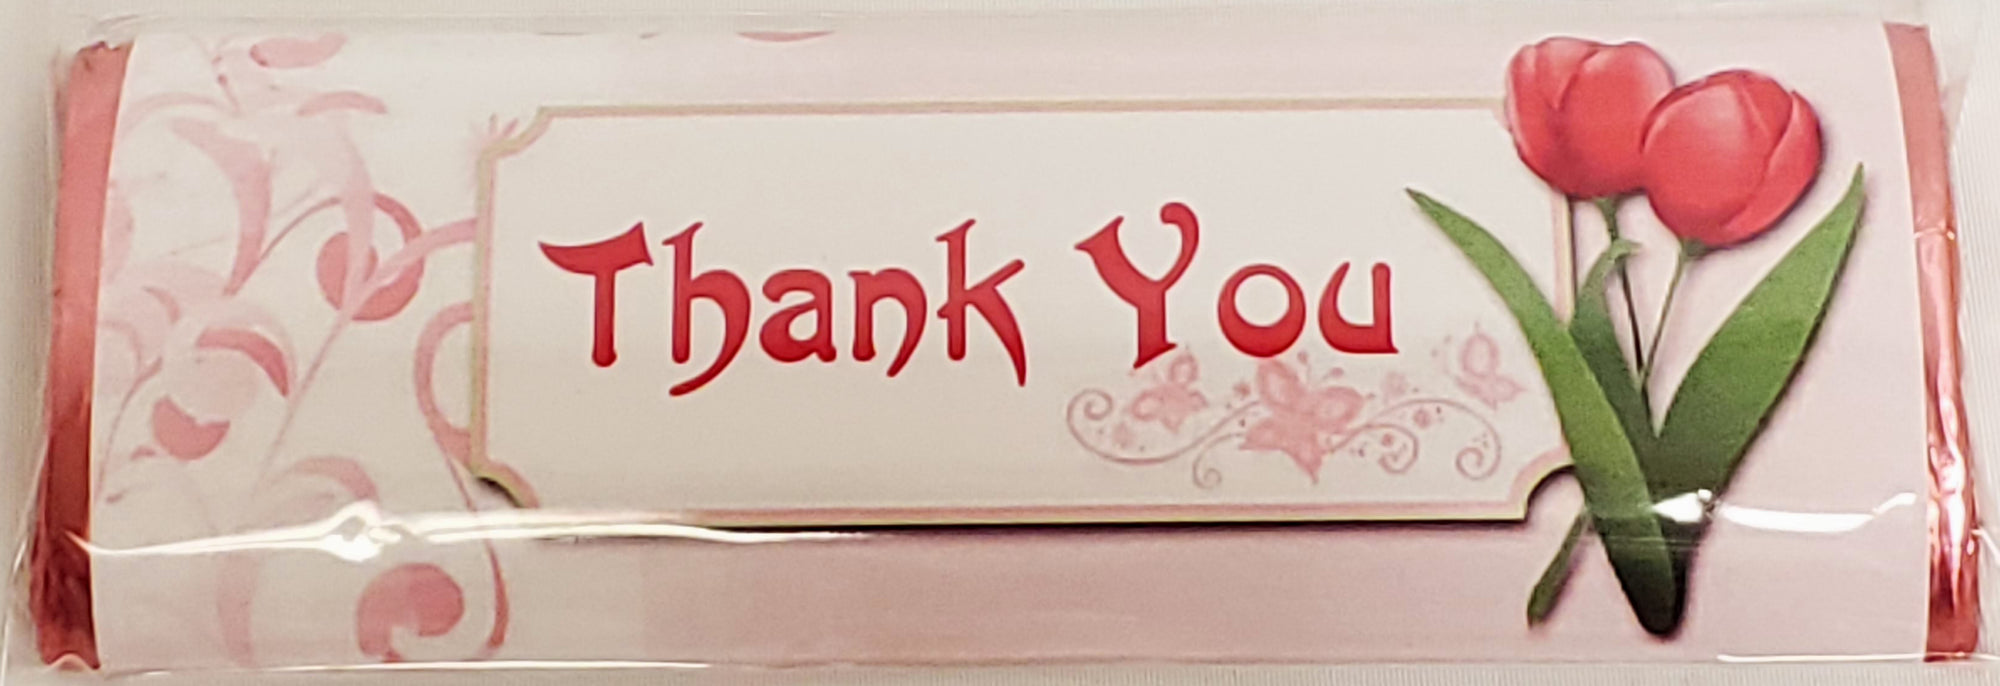 Thank You Chocolate Message